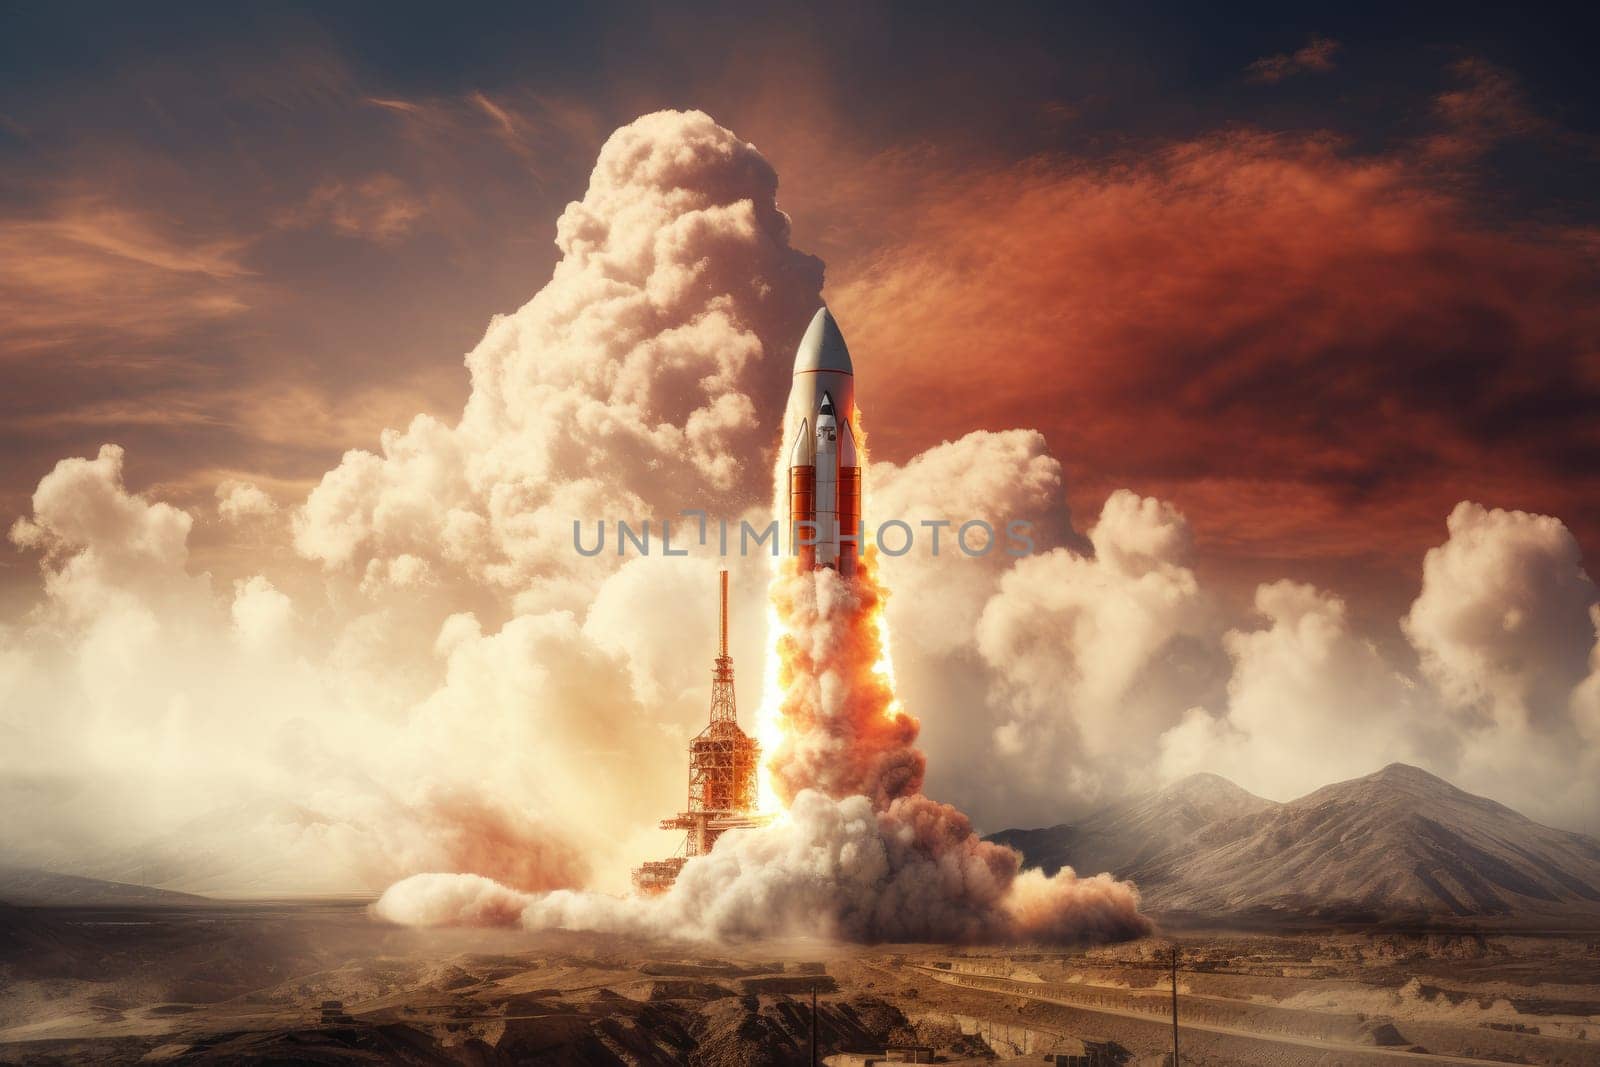 A stunning image capturing a rocket launch into the vastness of outer space, representing the exciting concept of space exploration adventure and discovery.